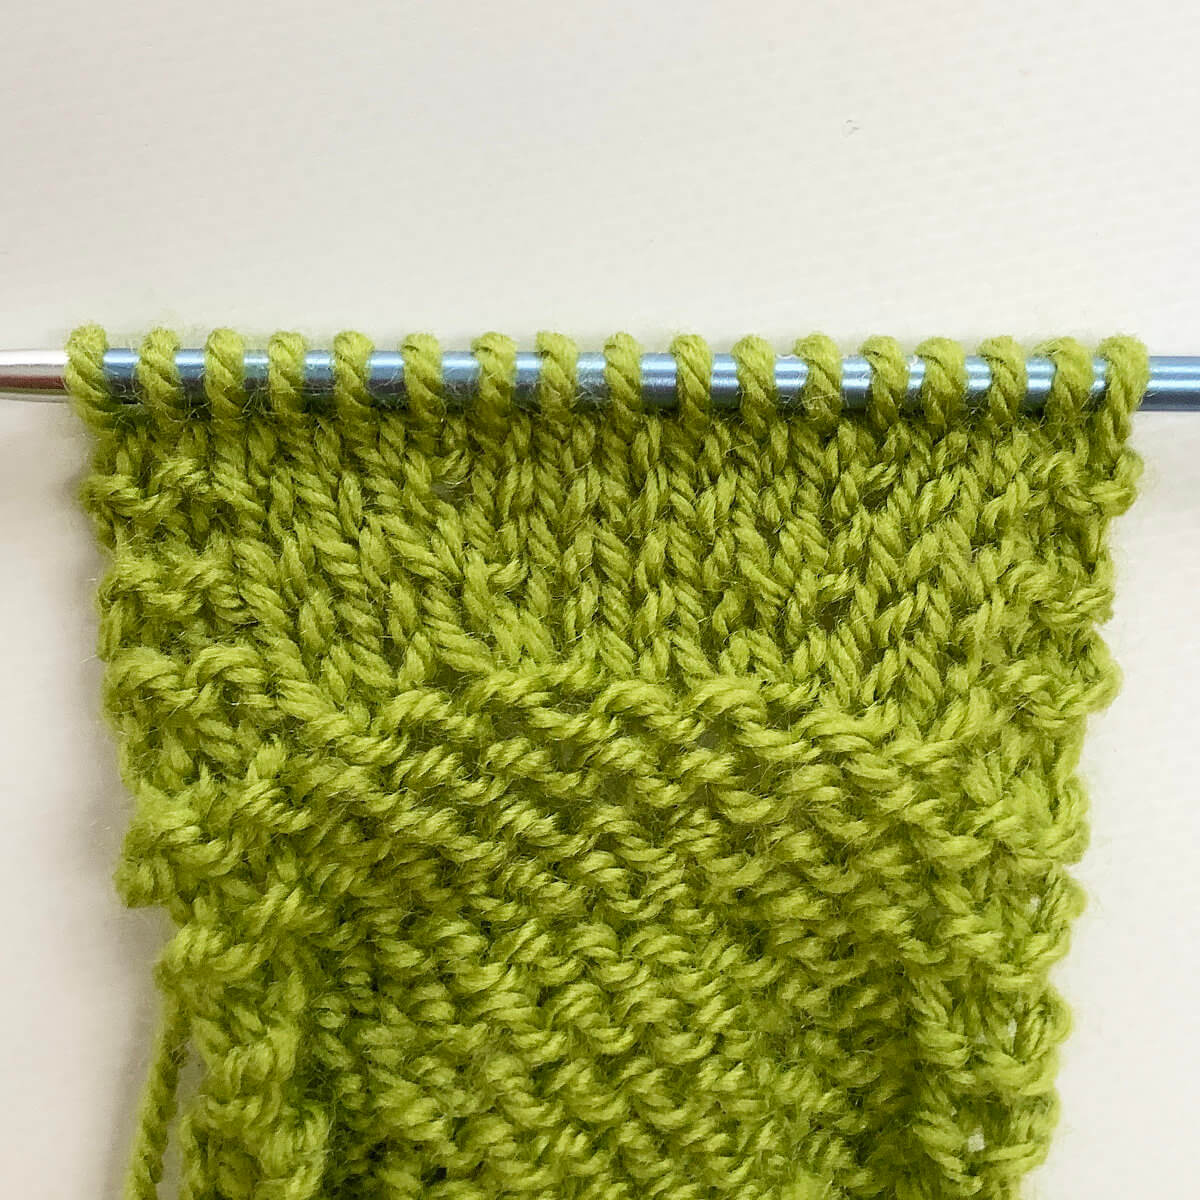 Working a pfb - The result on the knit side